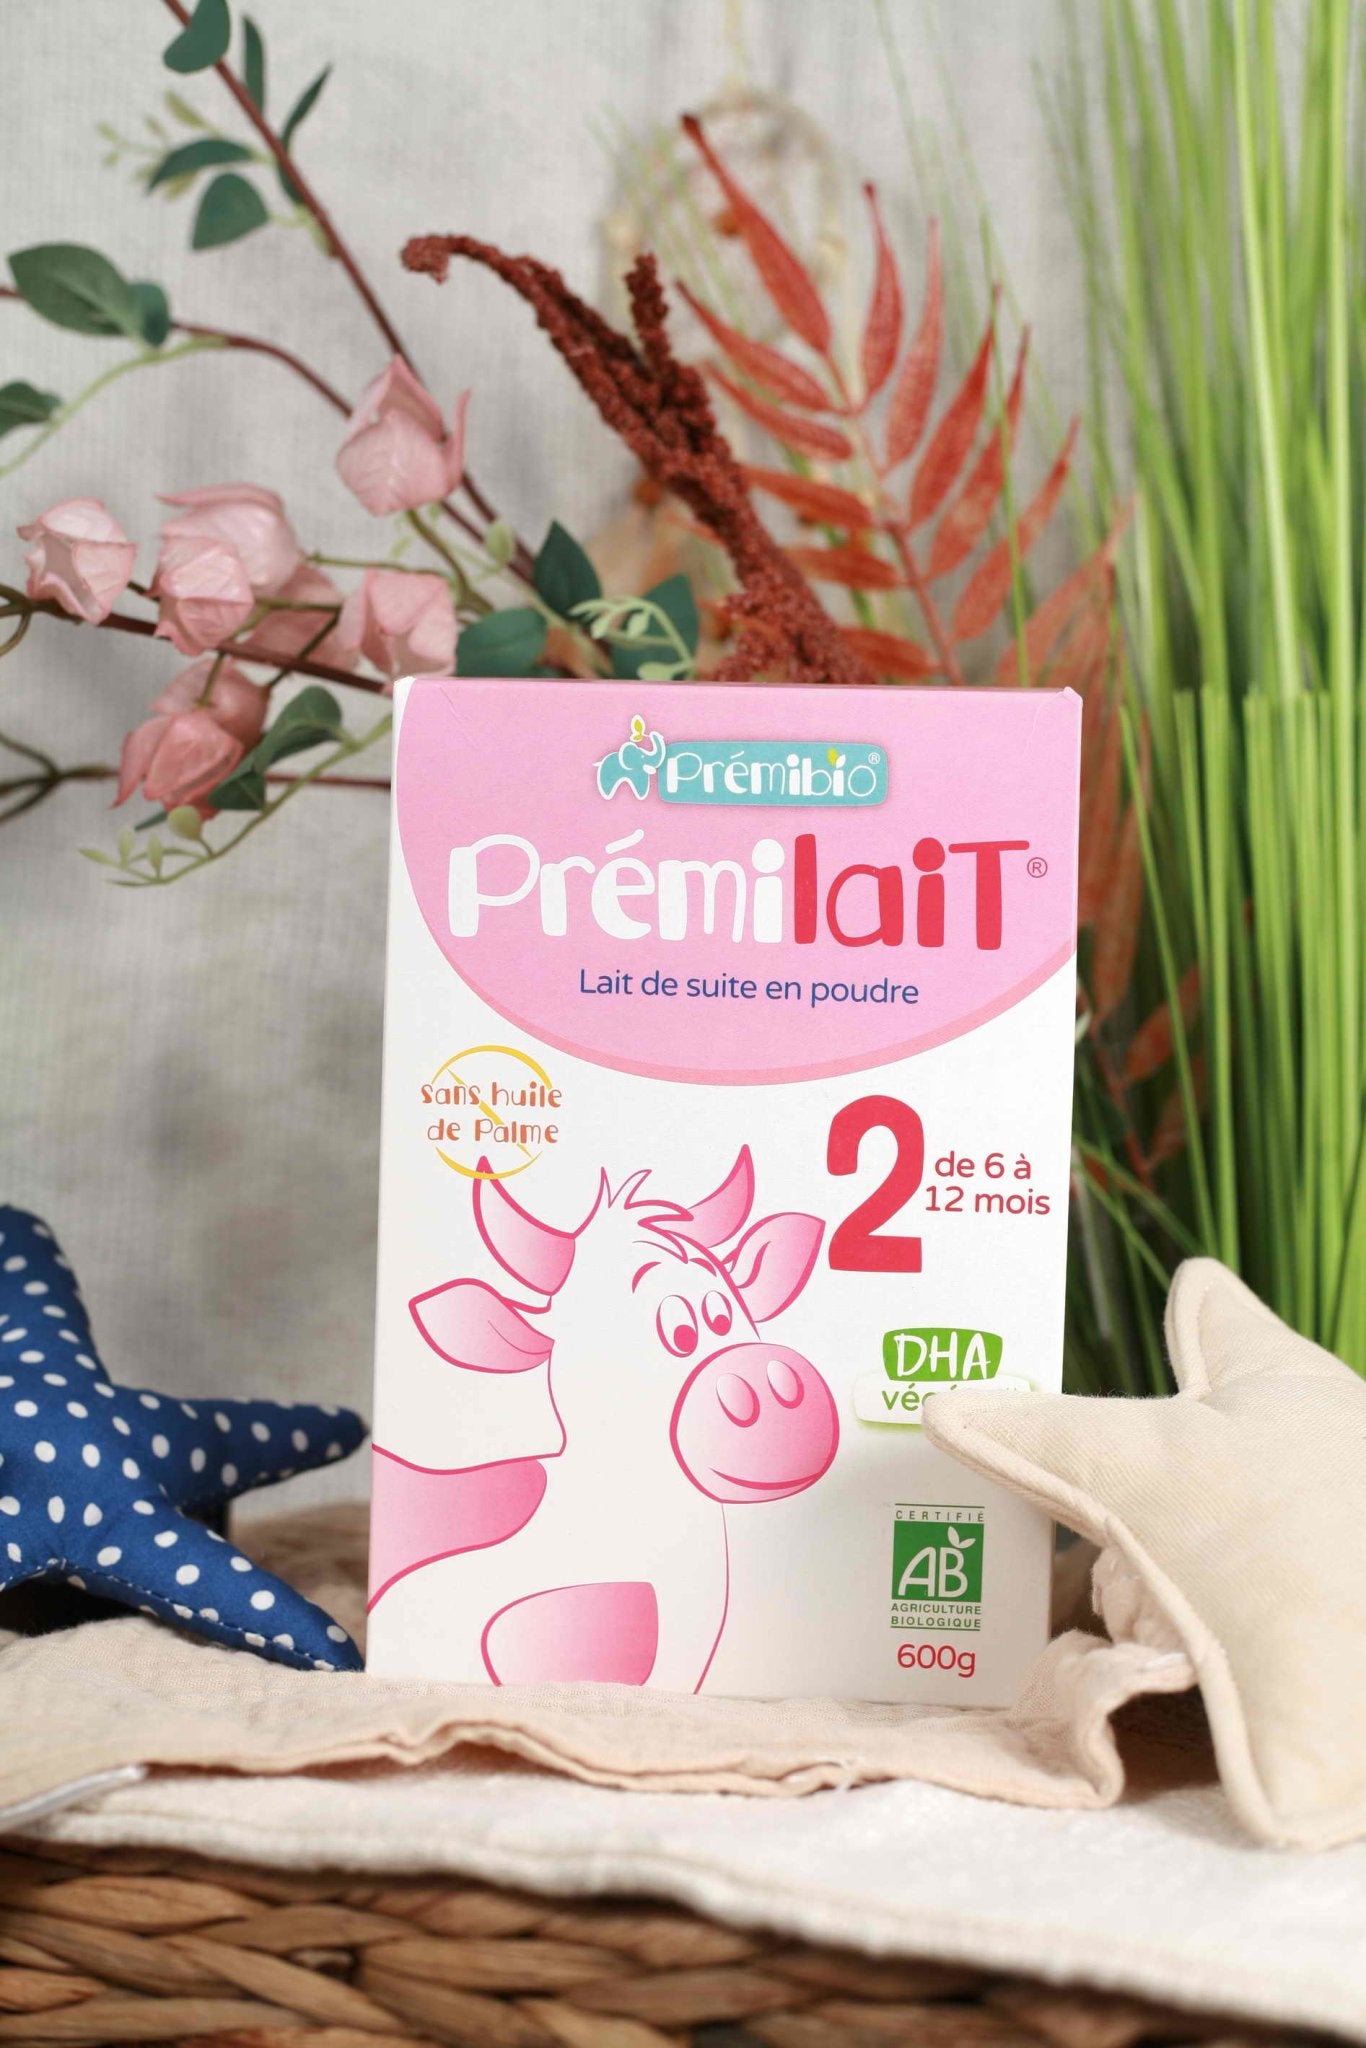 Nannycare® Goat Stage 2 🍼 Save up to $75 on first order❣️